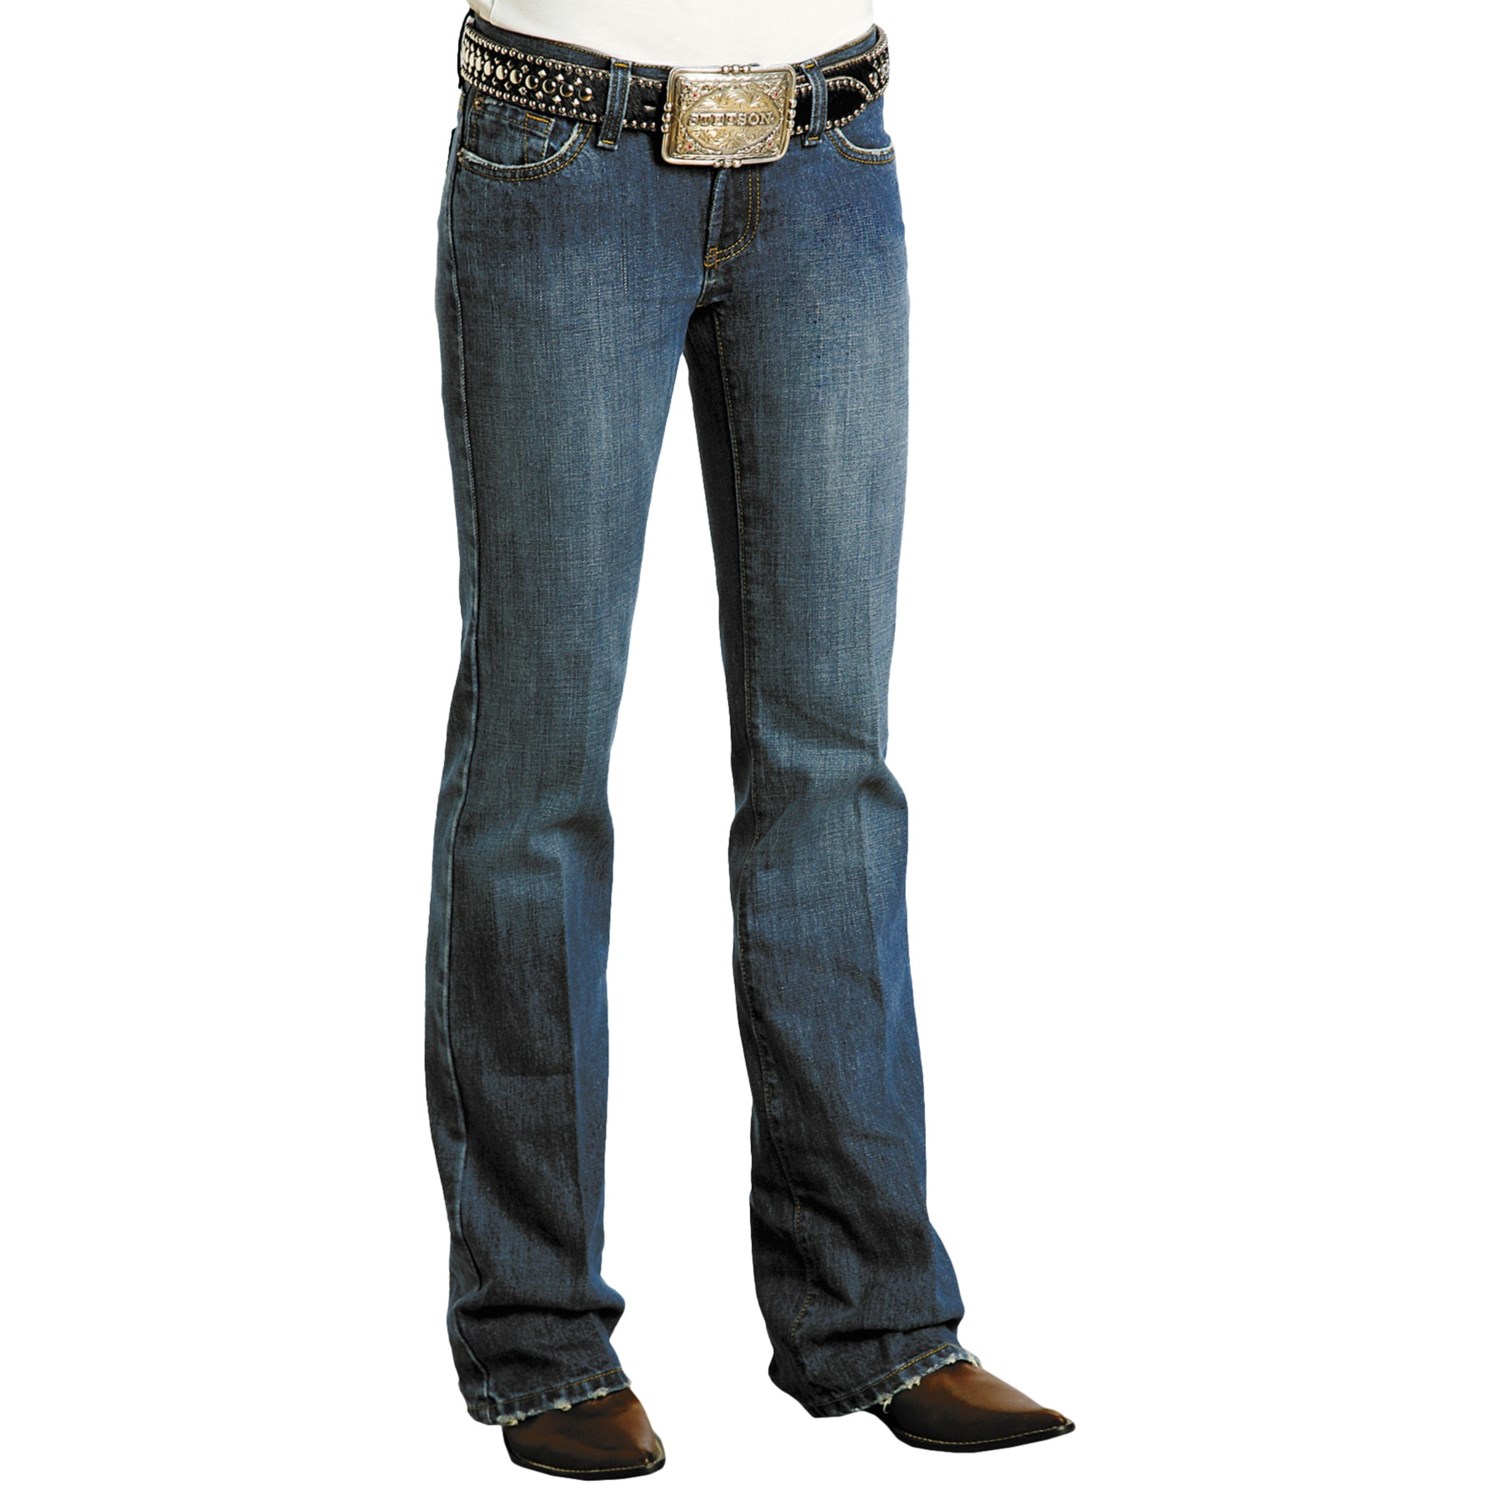 Stetson Western Jeans (For Women) 5717C - Save 78%